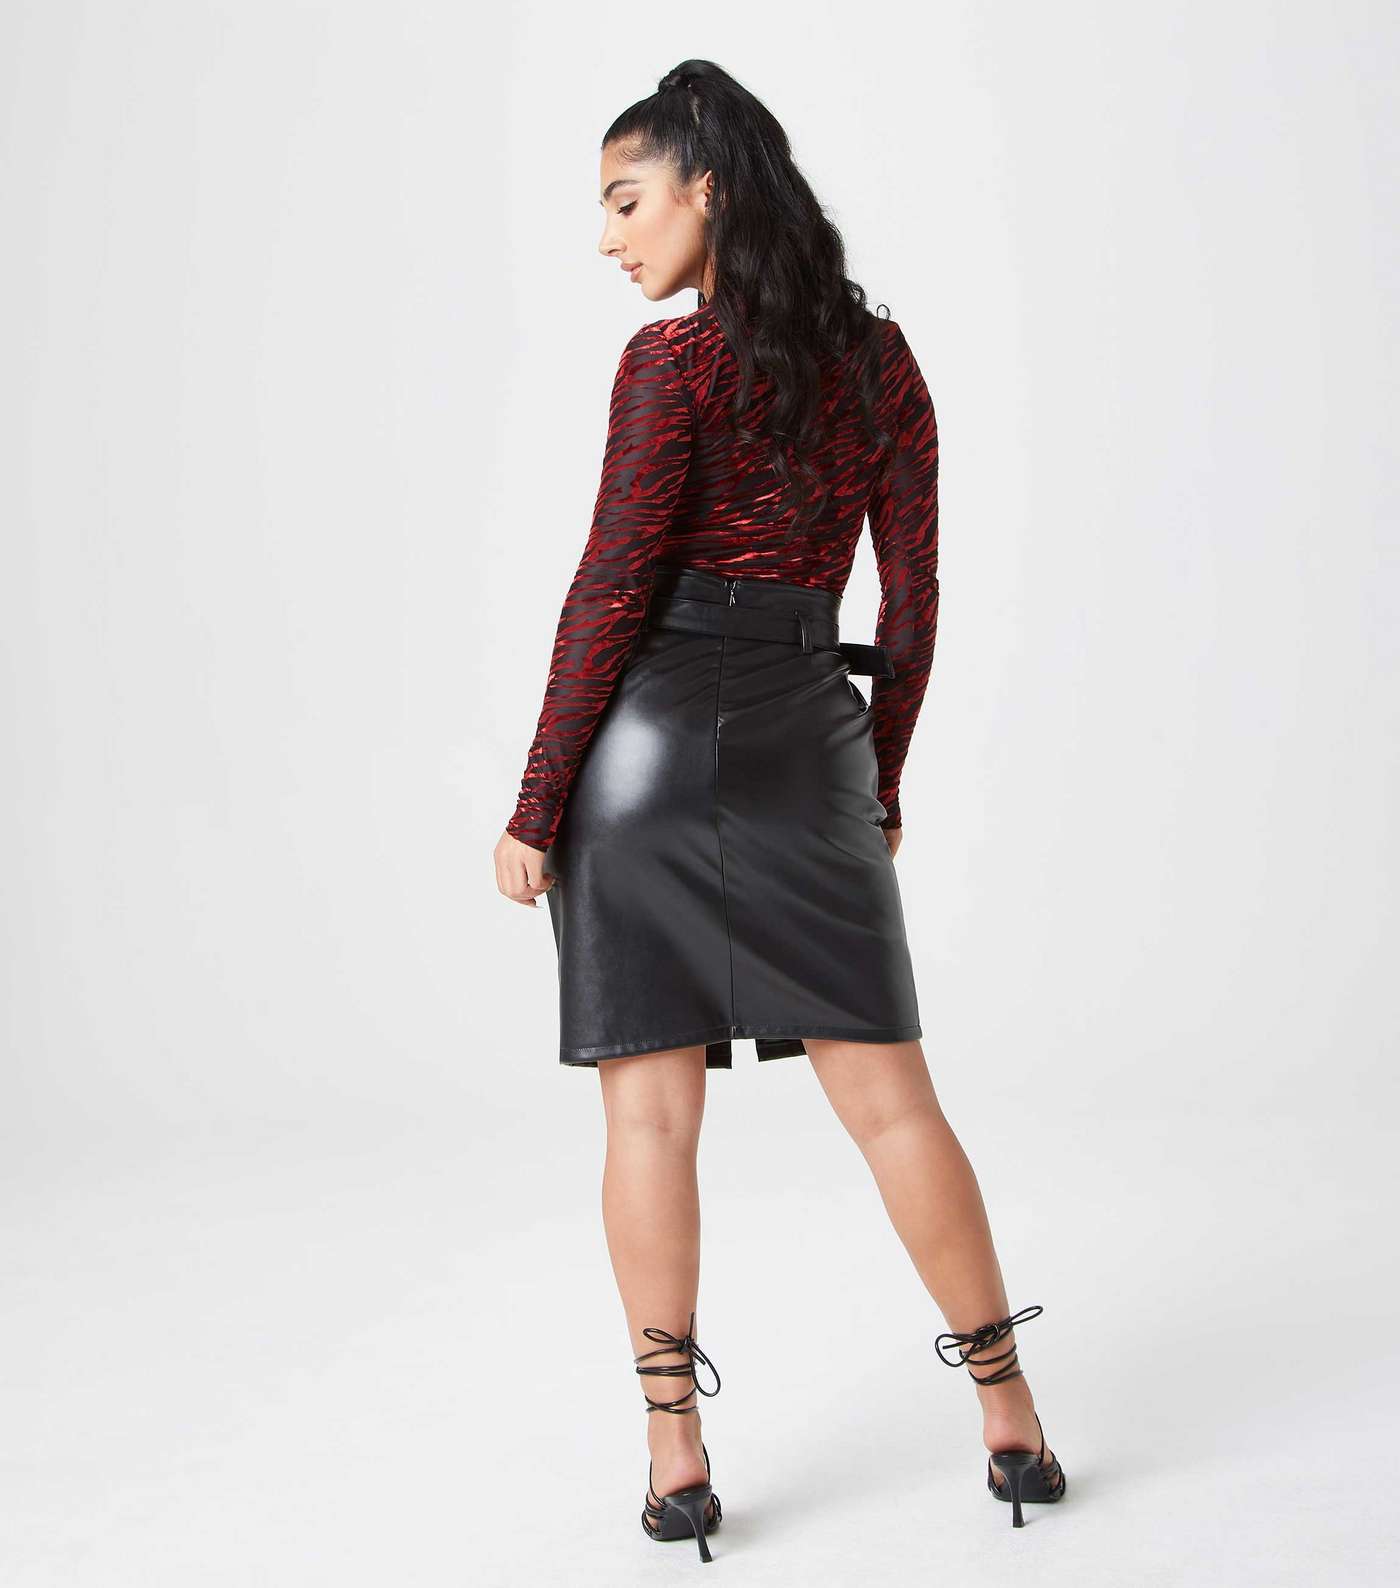 Urban Bliss Black Leather-Look Belted Skirt Image 2